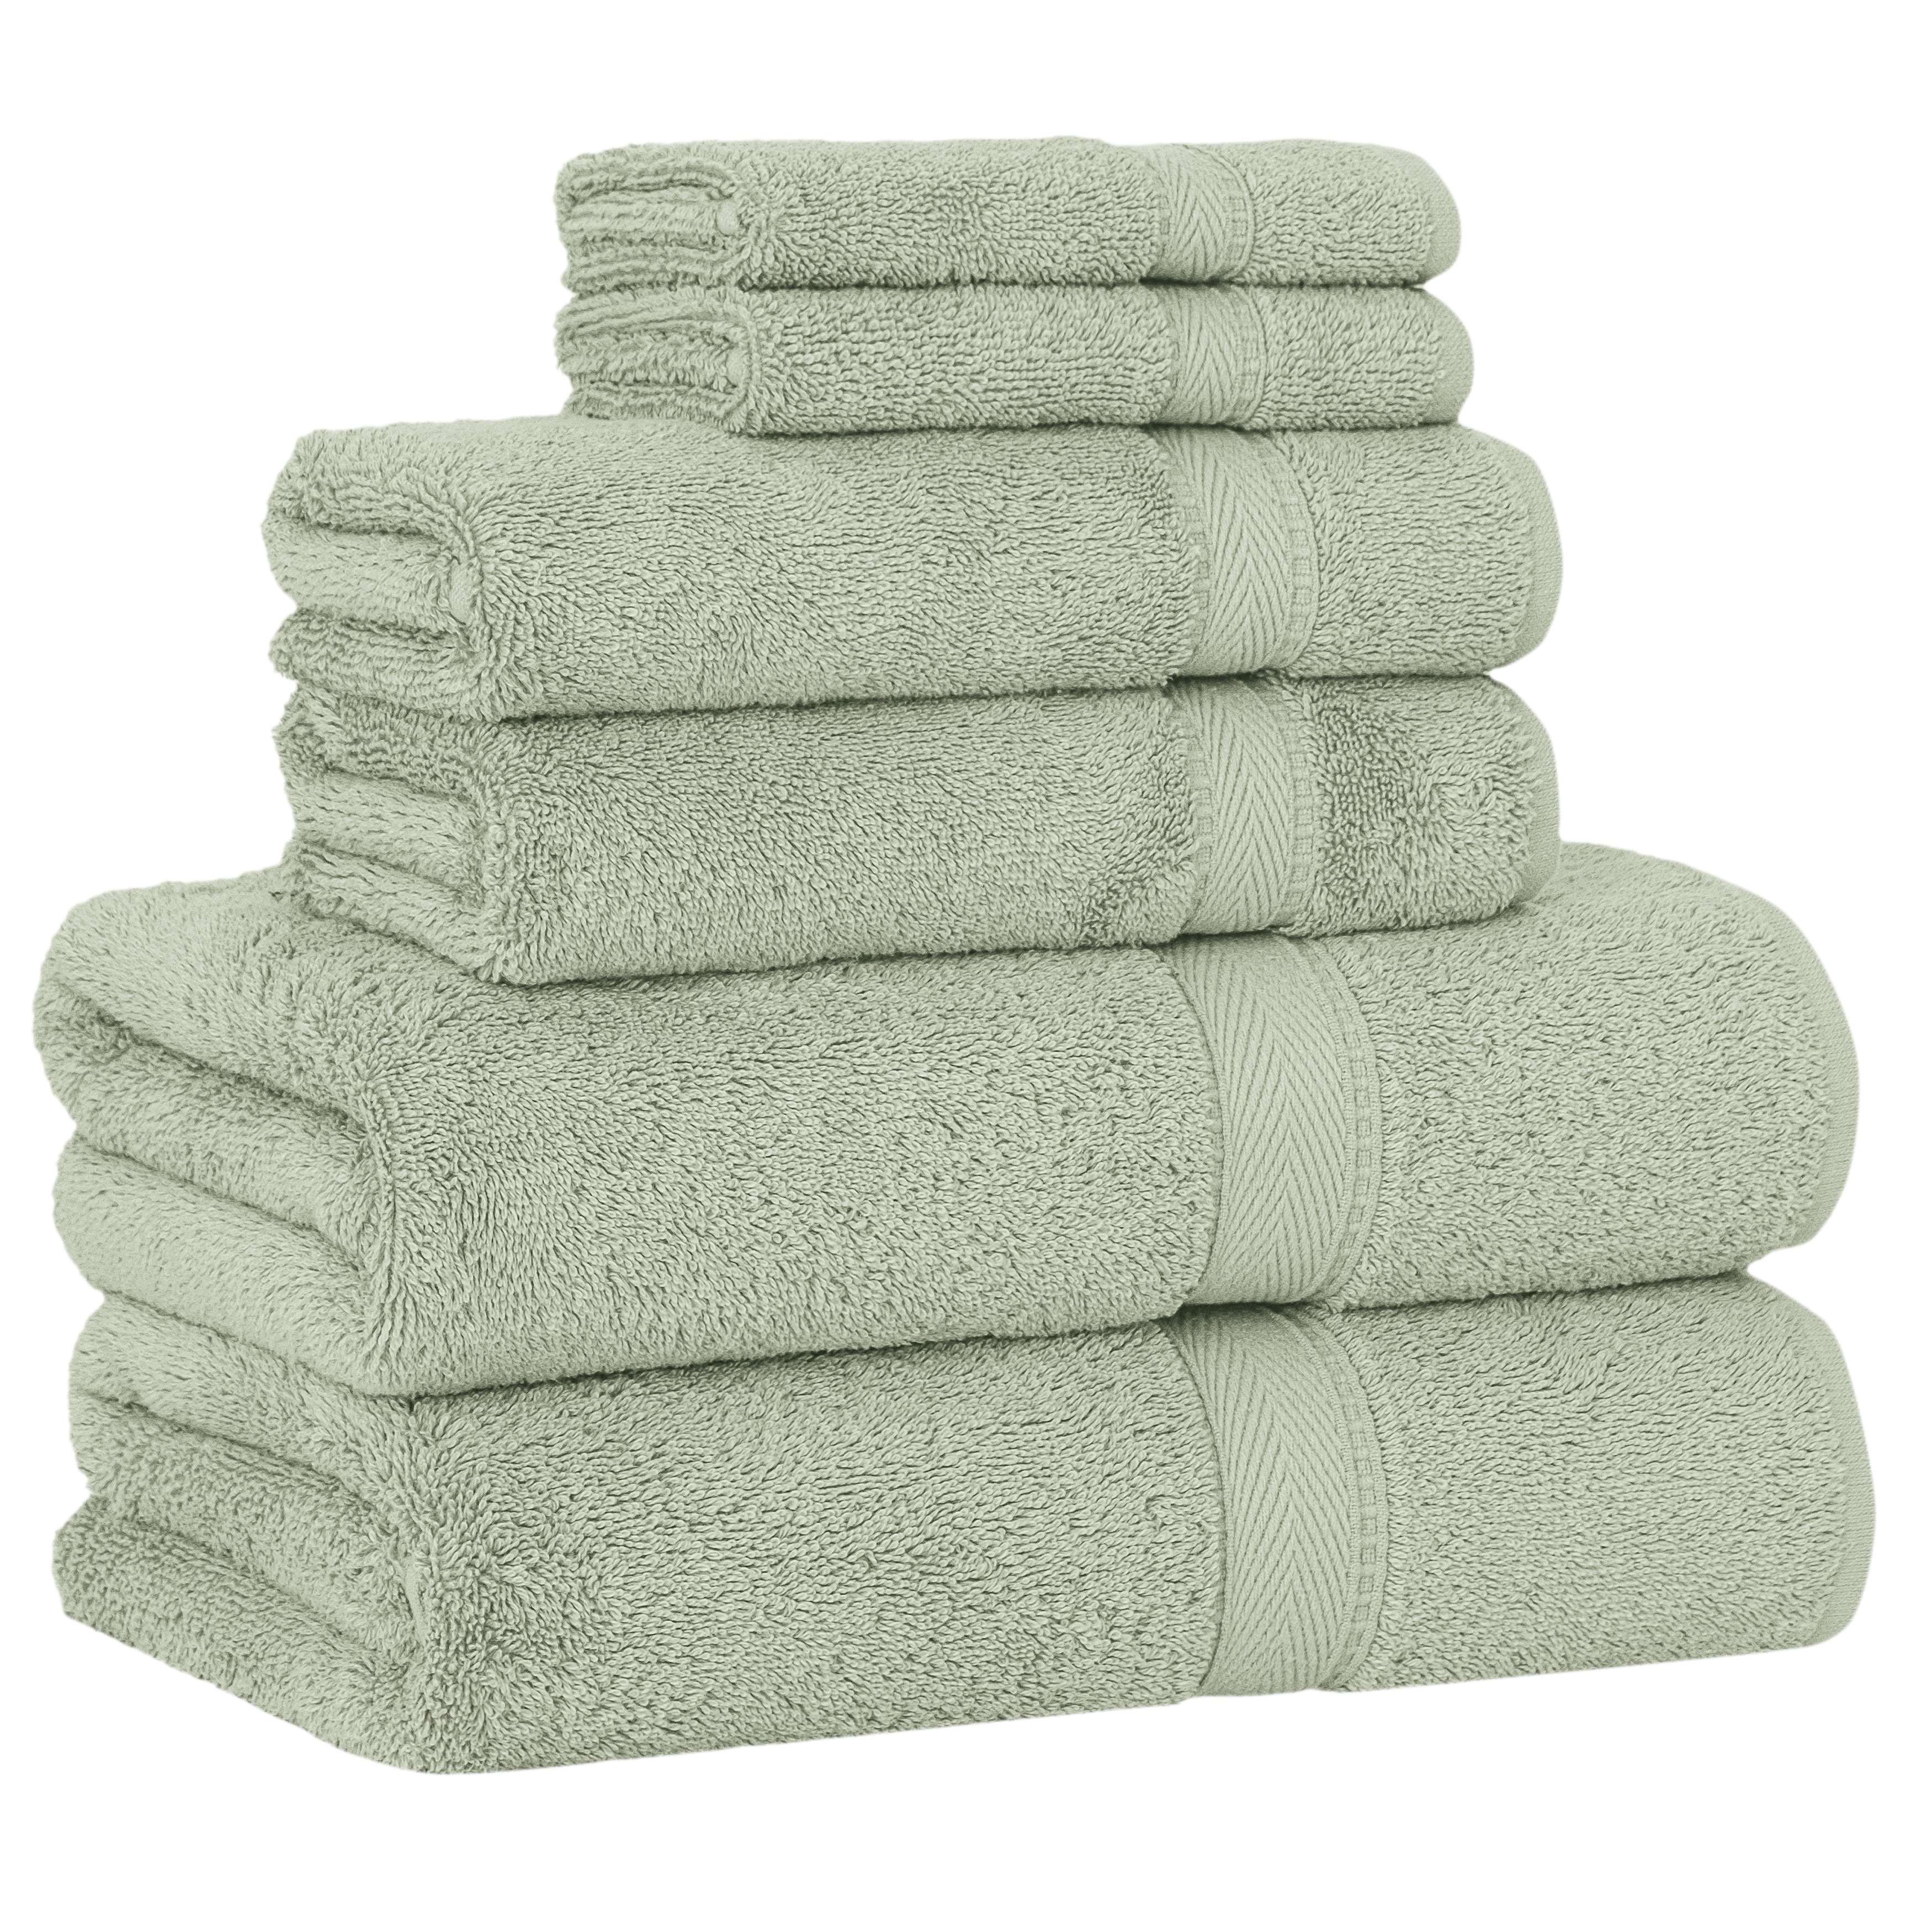 https://ak1.ostkcdn.com/images/products/is/images/direct/beb398698dae132fa15ca38926ffbb627e5d64a2/Authentic-Hotel-and-Spa-Turkish-Cotton-6-piece-Towel-Set.jpg